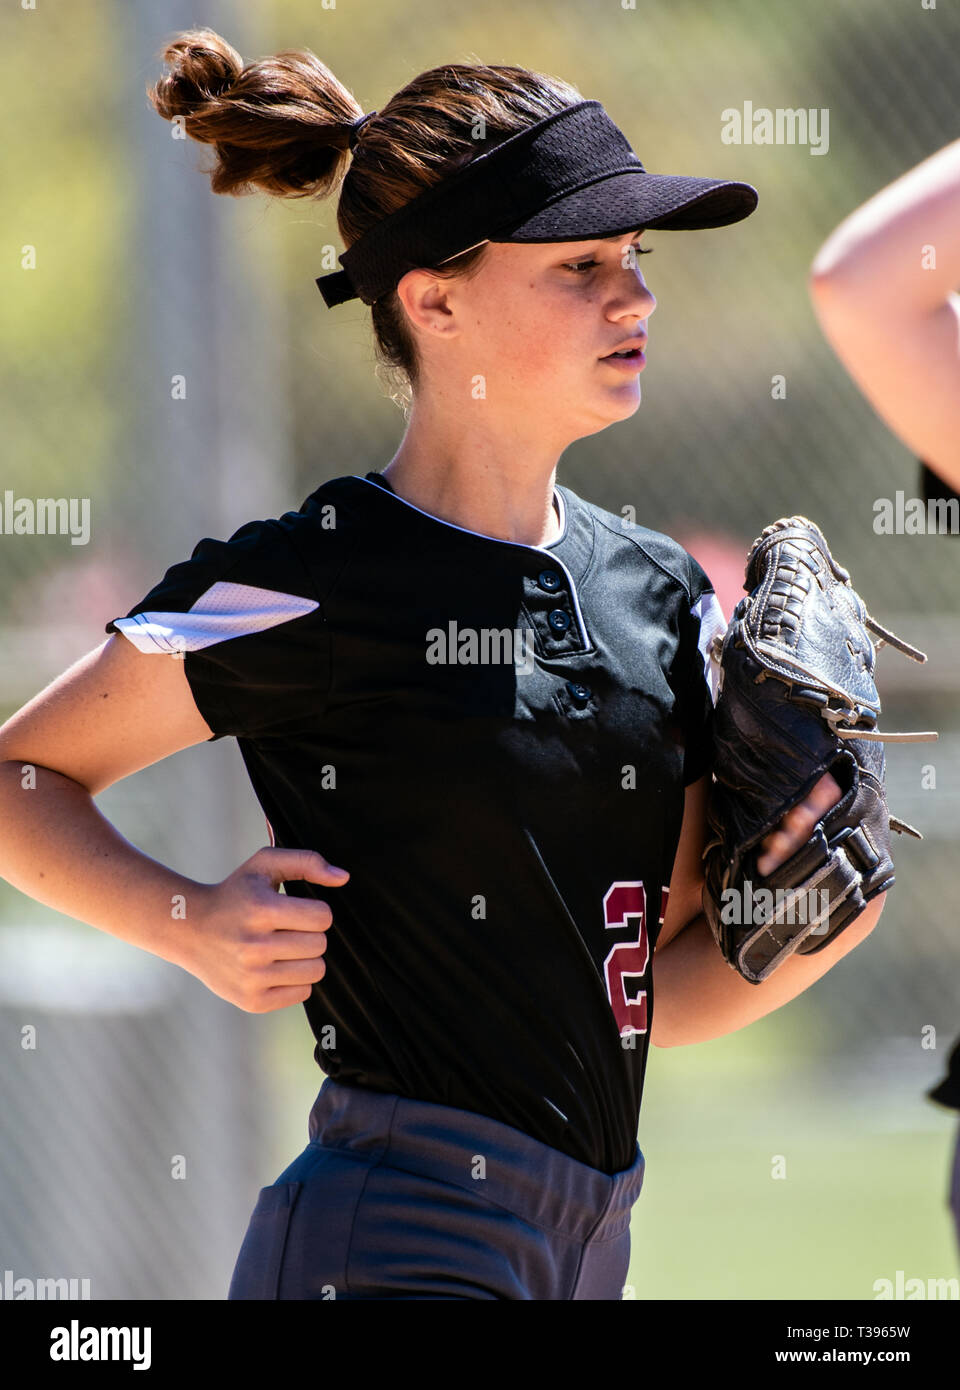 Female teenage softball player in black uniform throwing ball across  infield for the out in a cloud of dust Stock Photo - Alamy